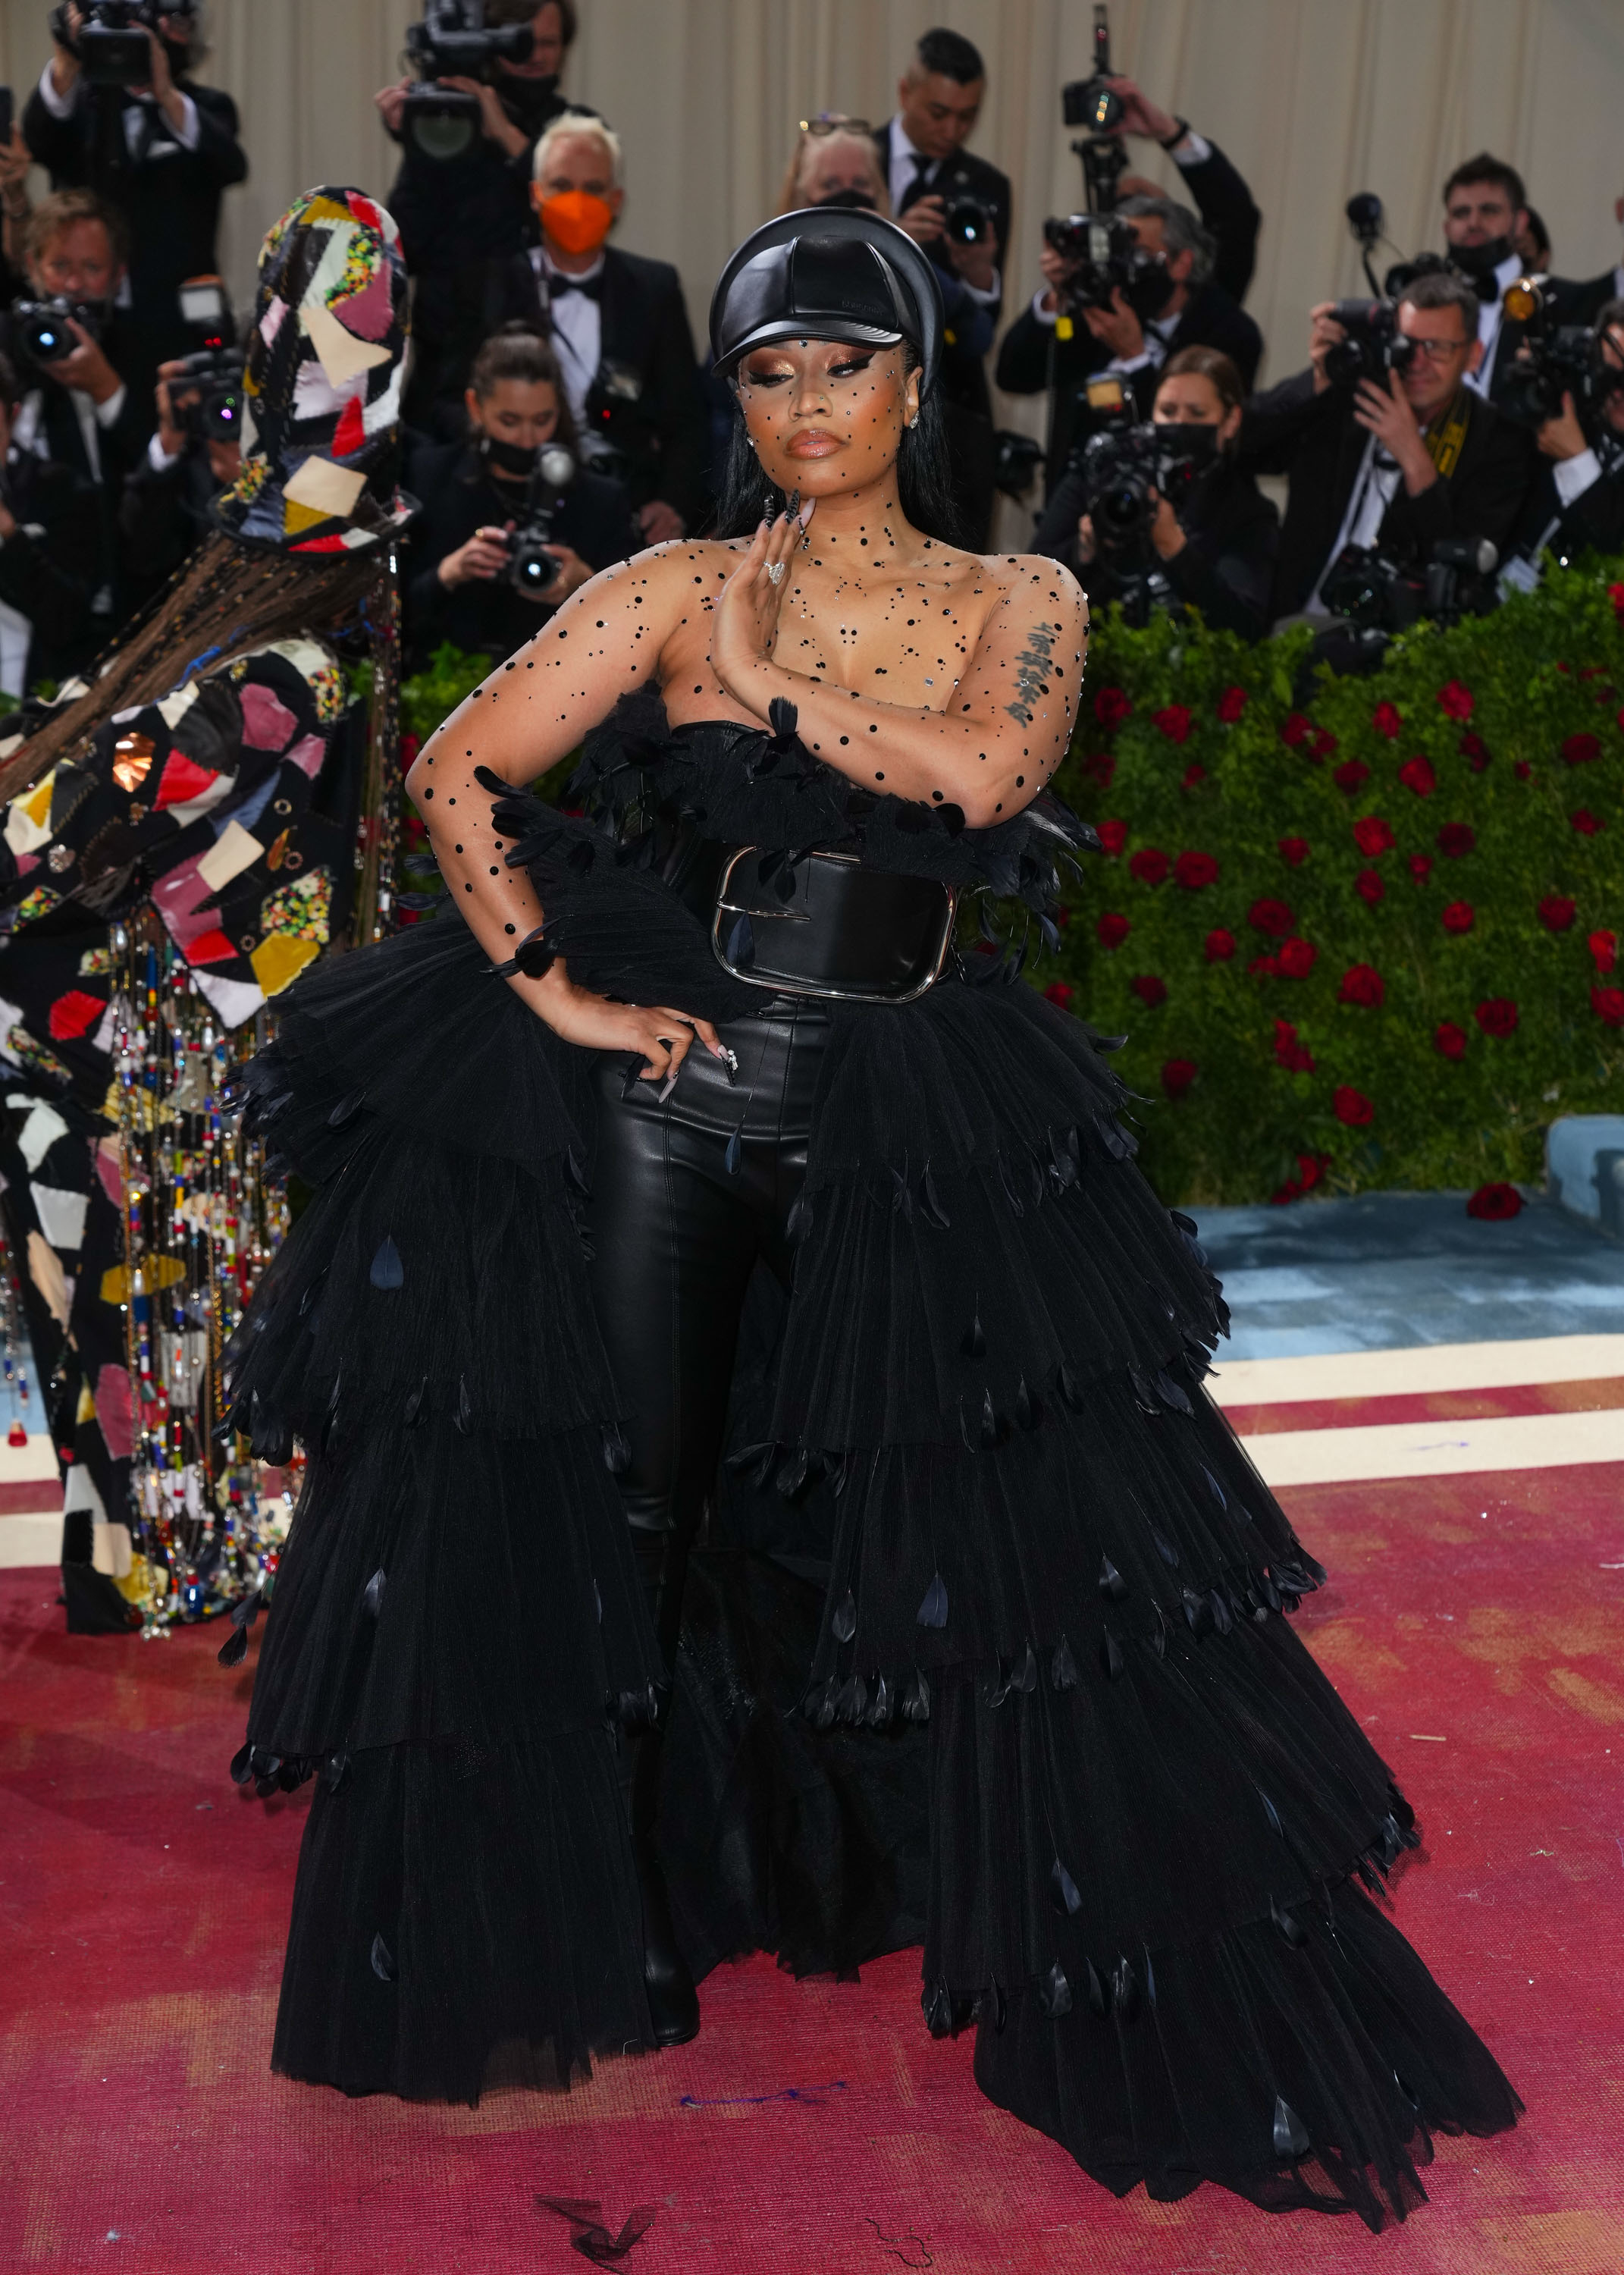 Nicki Minaj at an event wearing a black, ruffled outfit with belt and embellishments, posed on the red carpet